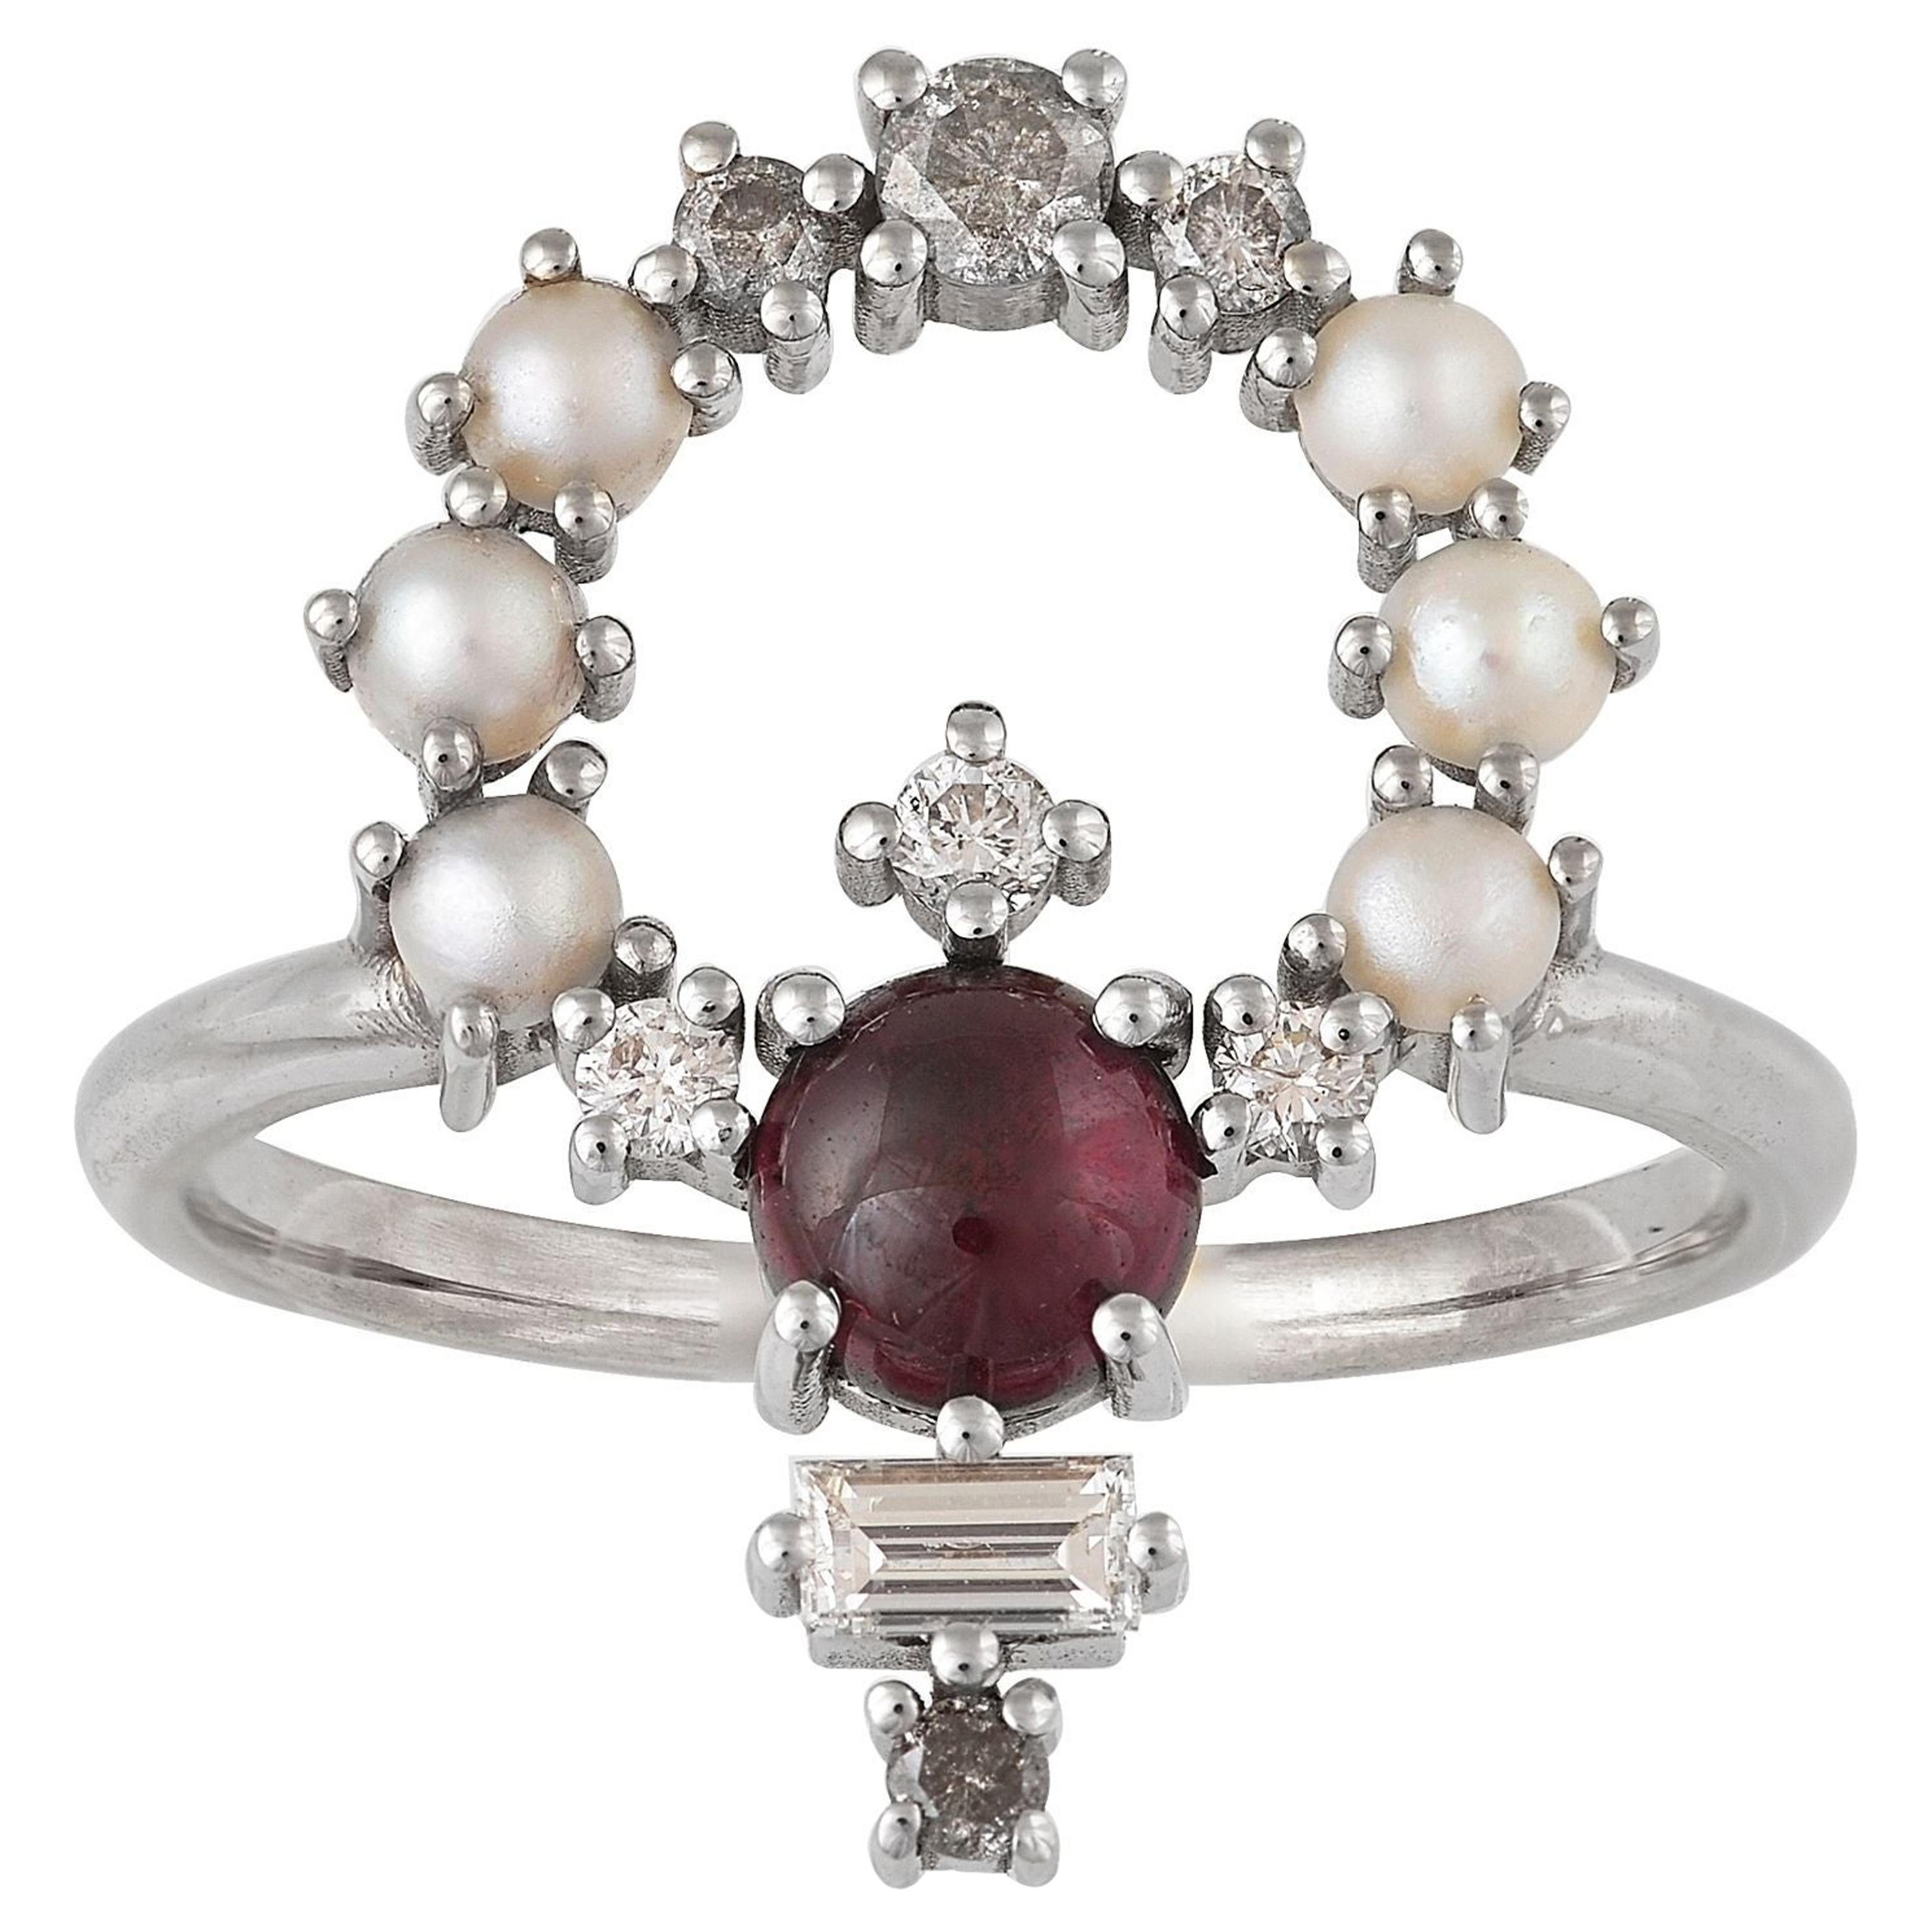 Colorful 18 Karat Gold Ring with Diamonds, Garnets, Pearls